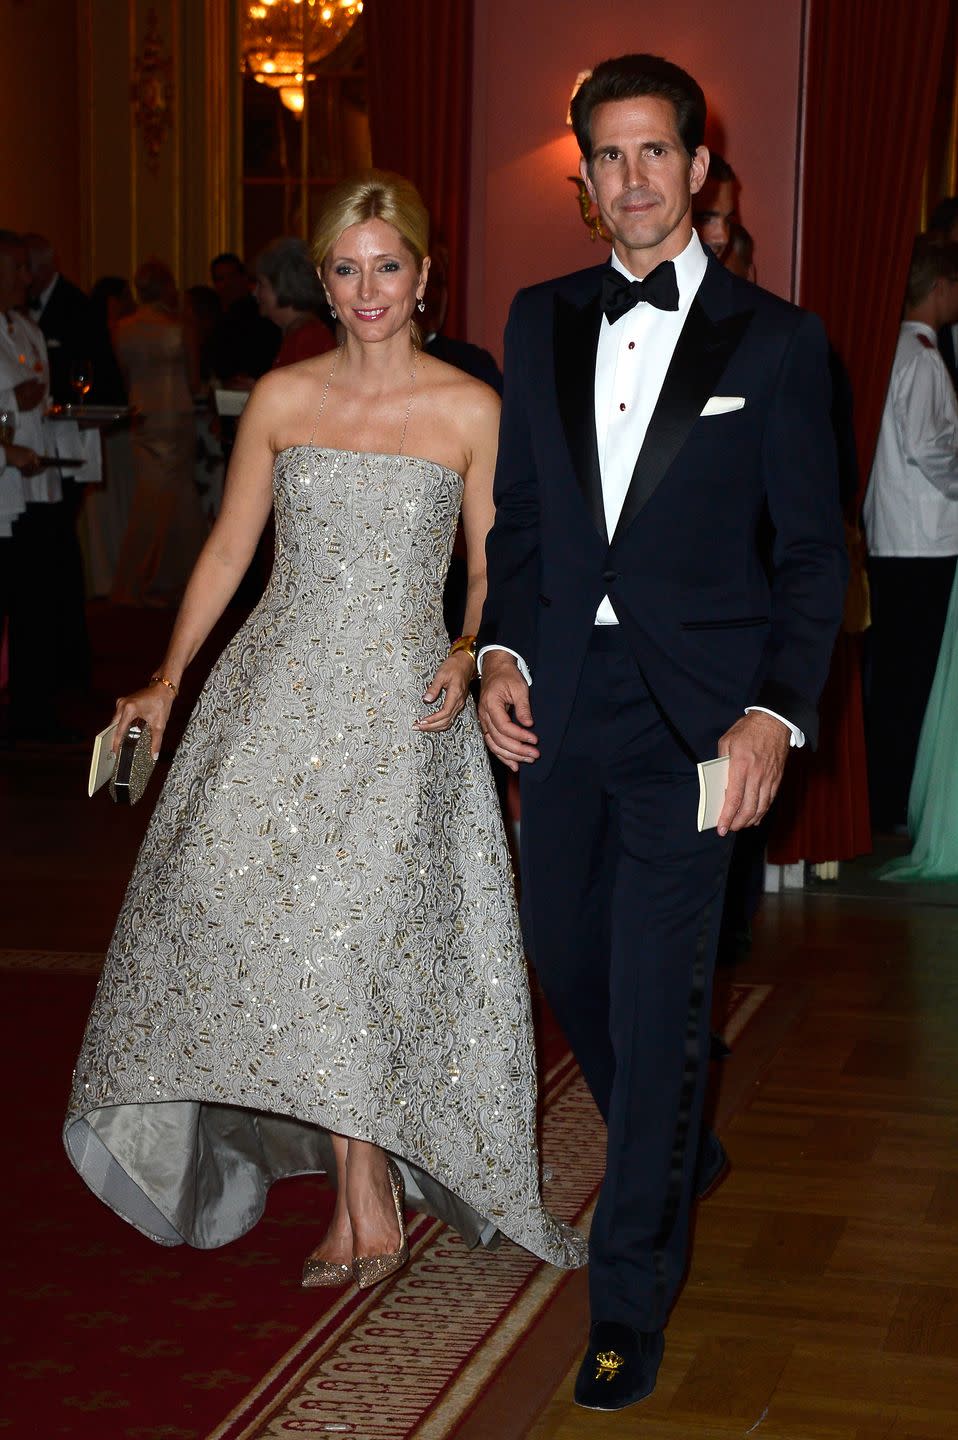 The 14 Most Fashionable (Lesser Known) Royals from Around the World